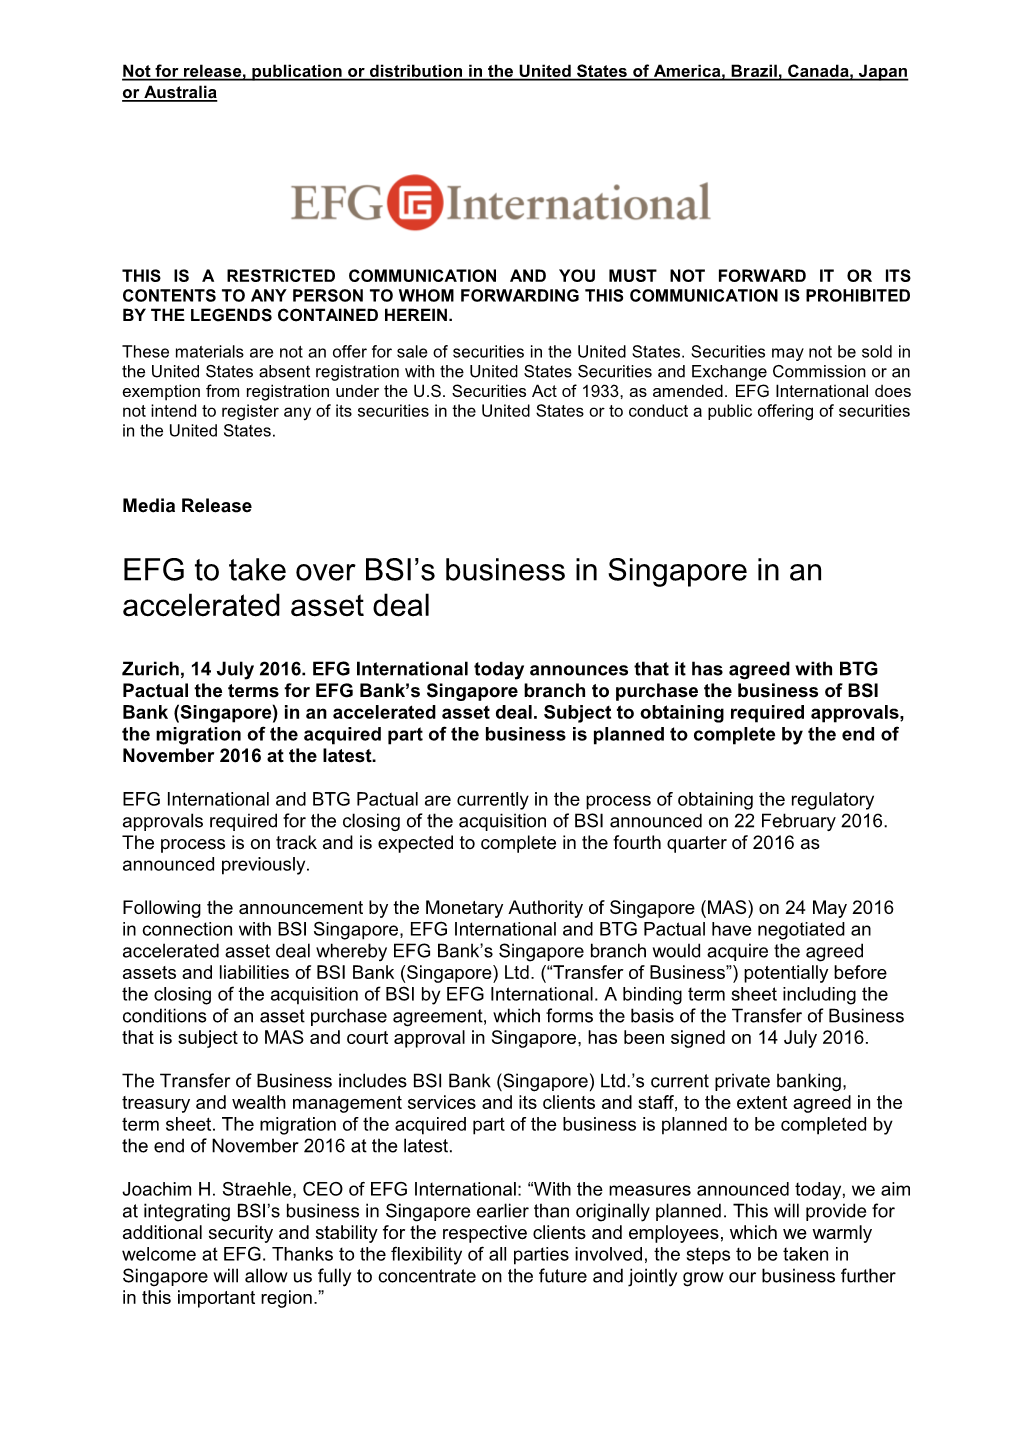 EFG to Take Over BSI's Business in Singapore in An